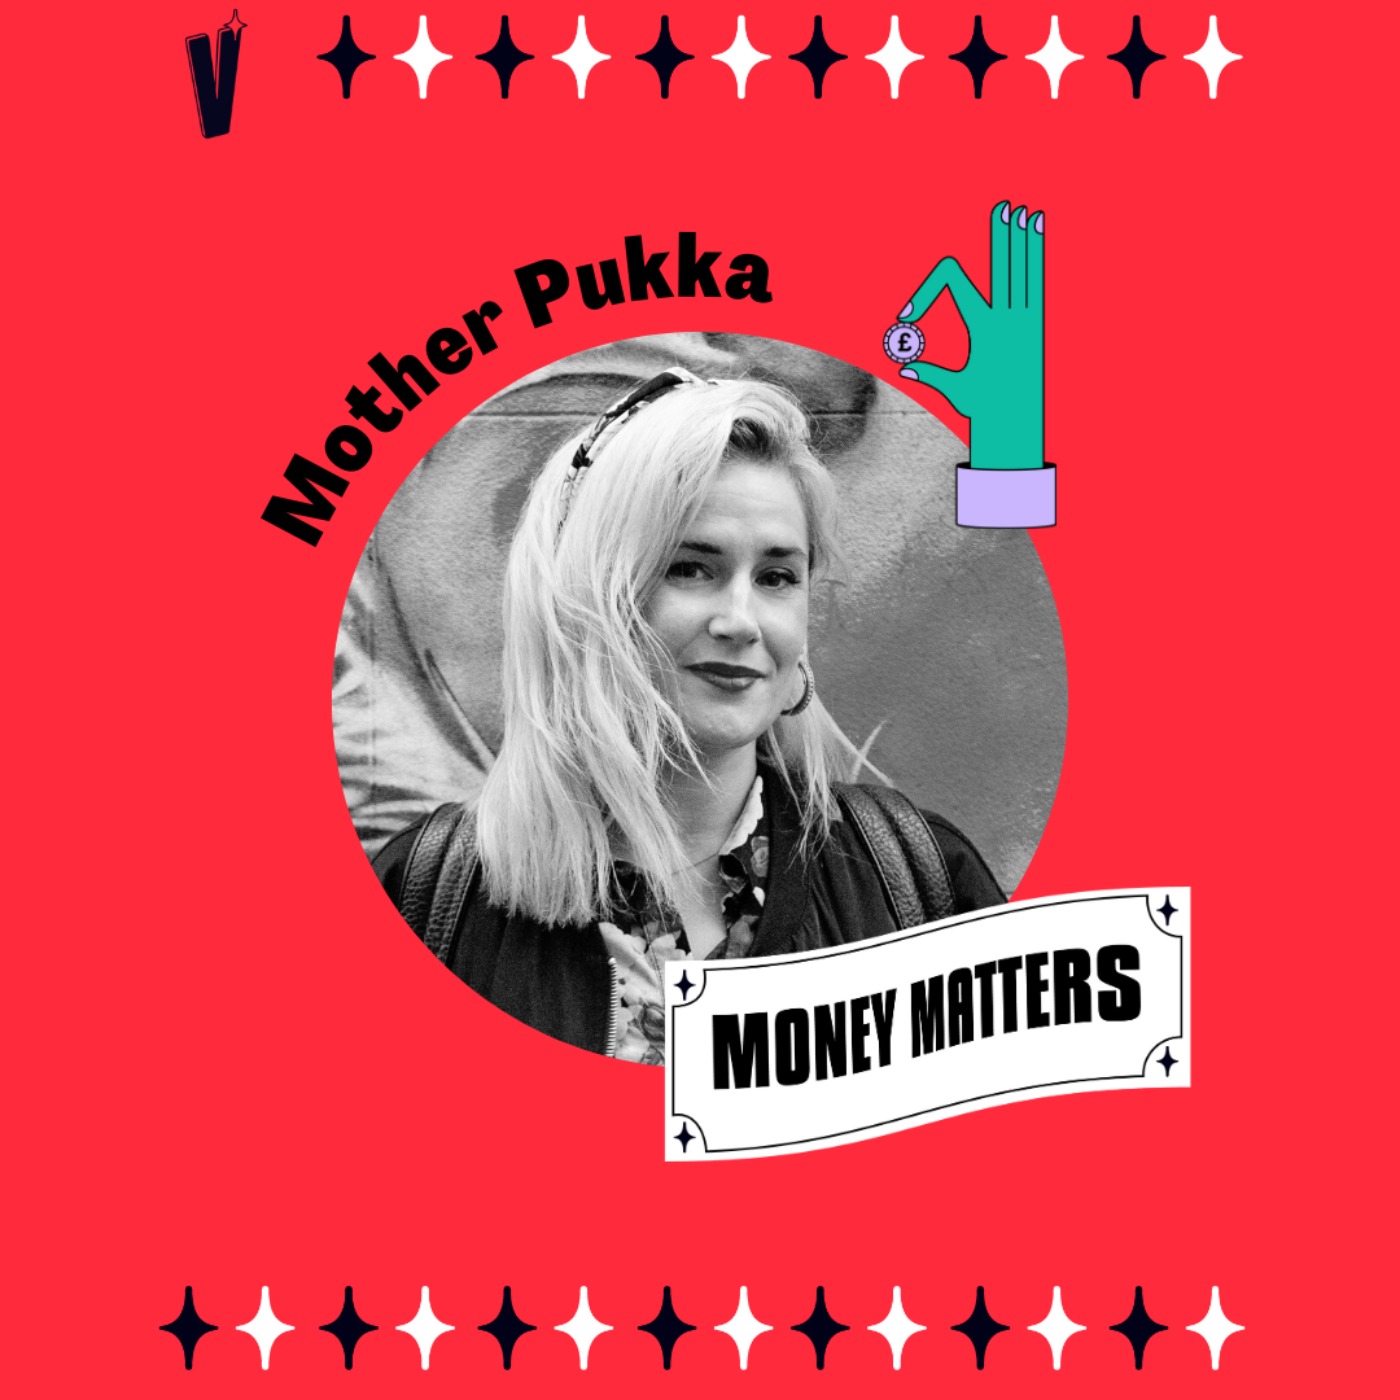 Inclusive Working with Mother Pukka (Money Matters Festival 2022)